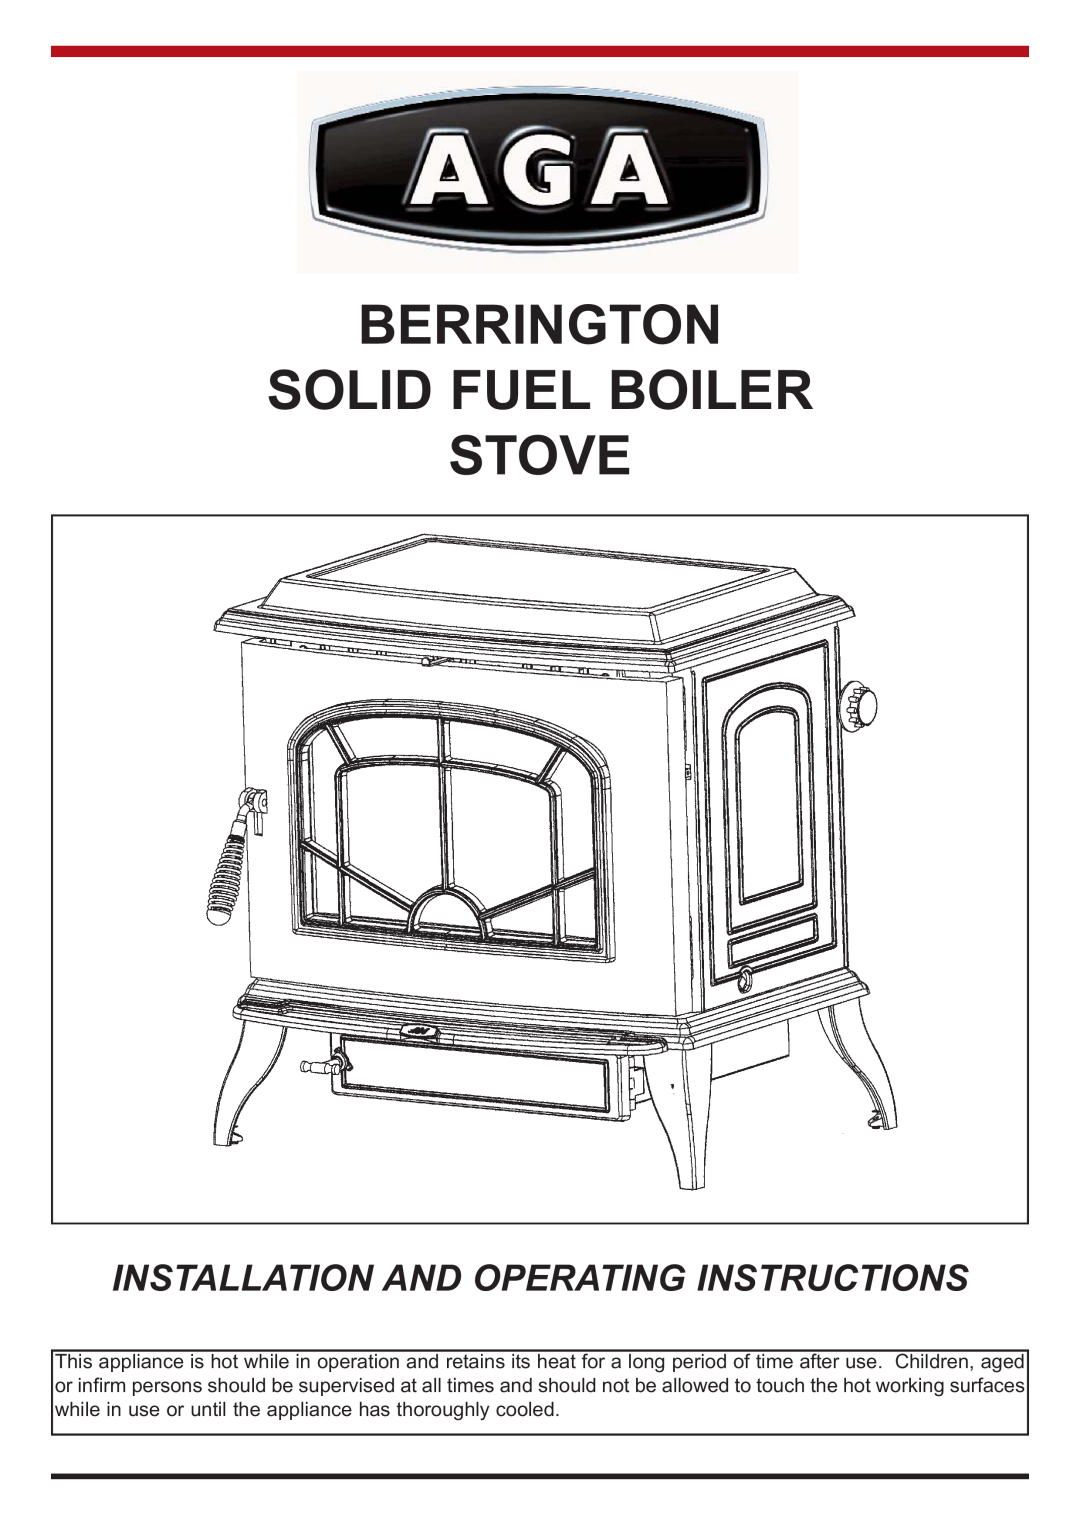 Aga Ranges manual Berrington Solid Fuel Boiler Stove, Installation And Operating Instructions 